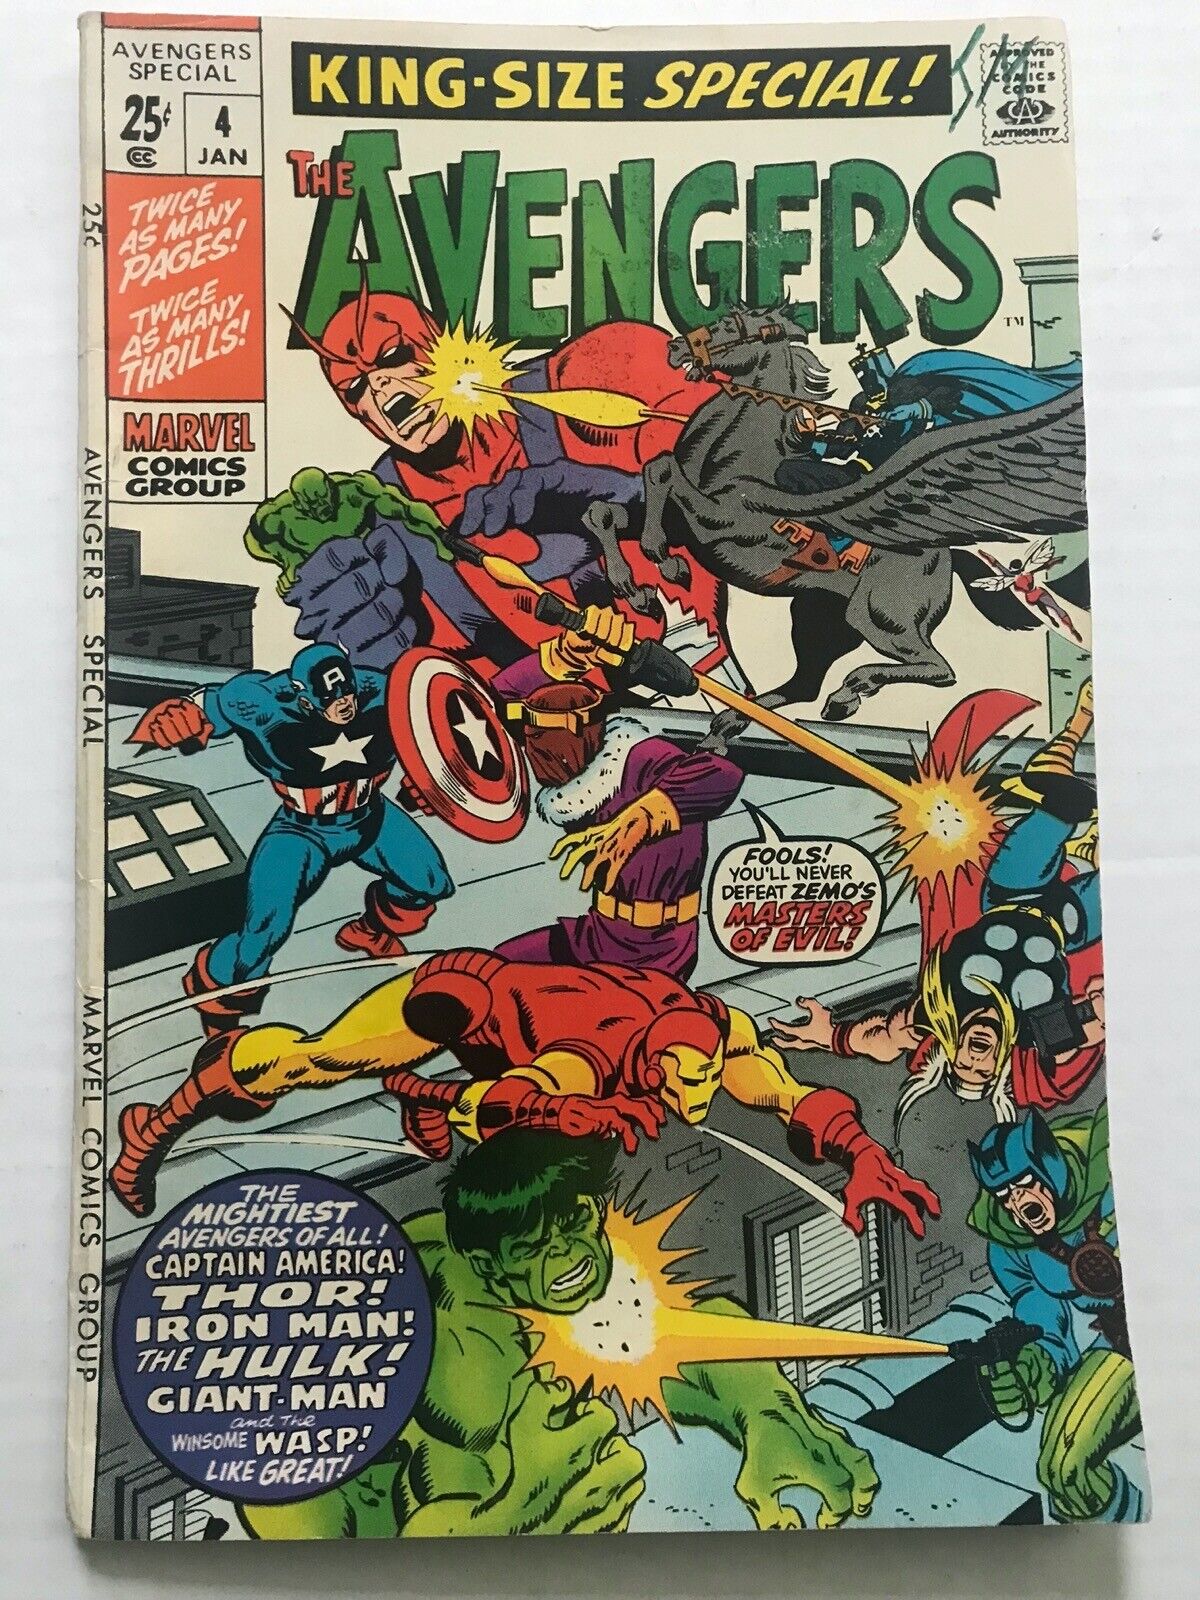 AVENGERS KING-SIZE SPECIAL #4 25¢ The Invasion of the Lava Men 1971 MARVEL COMIC